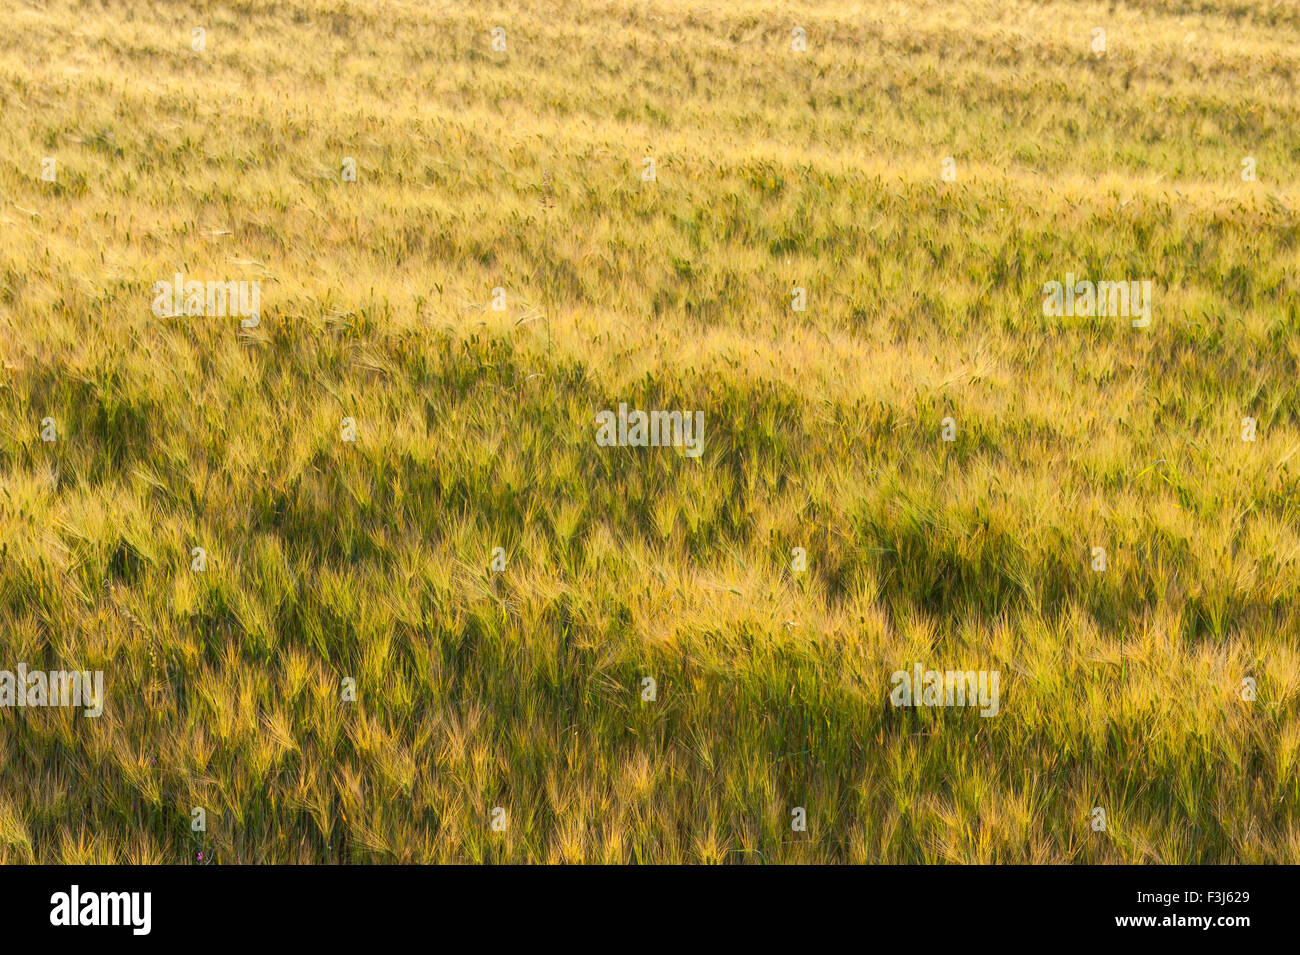 Field of Barley (Hordeum vulgare L.) in contralight during sunset Stock Photo